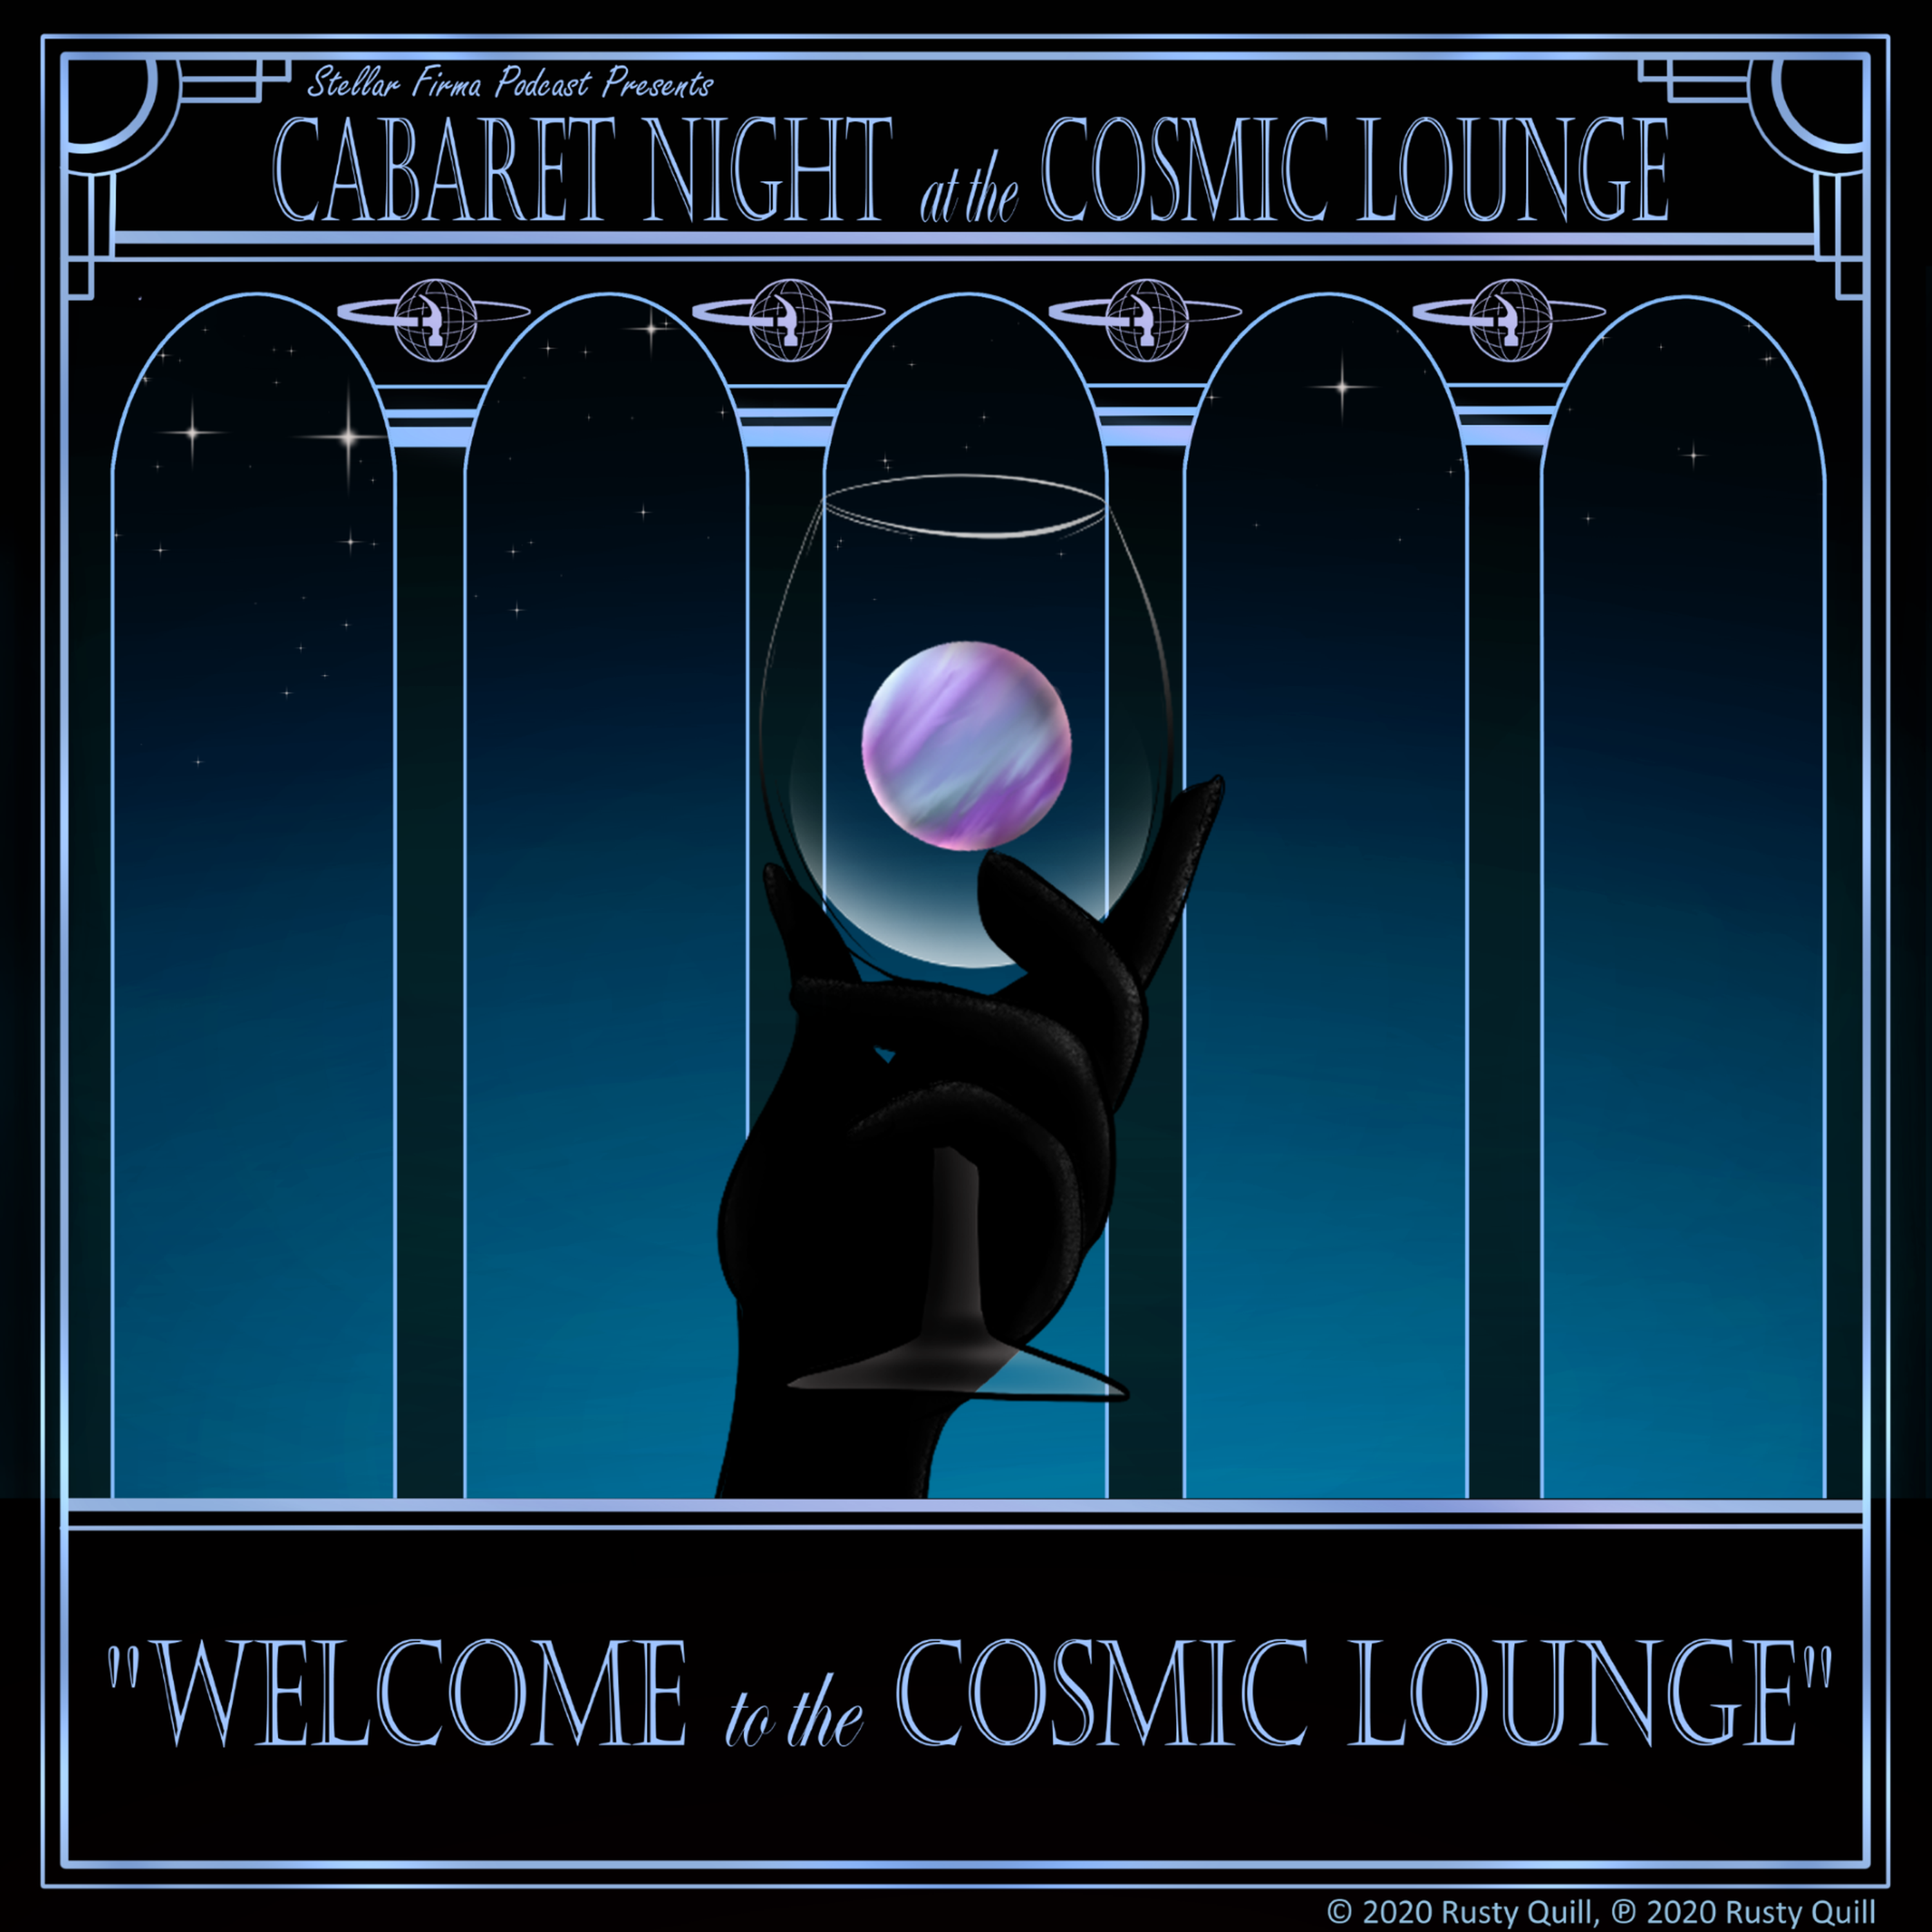 Cabaret Night at the Cosmic Lounge: Welcome to the Cosmic Lounge